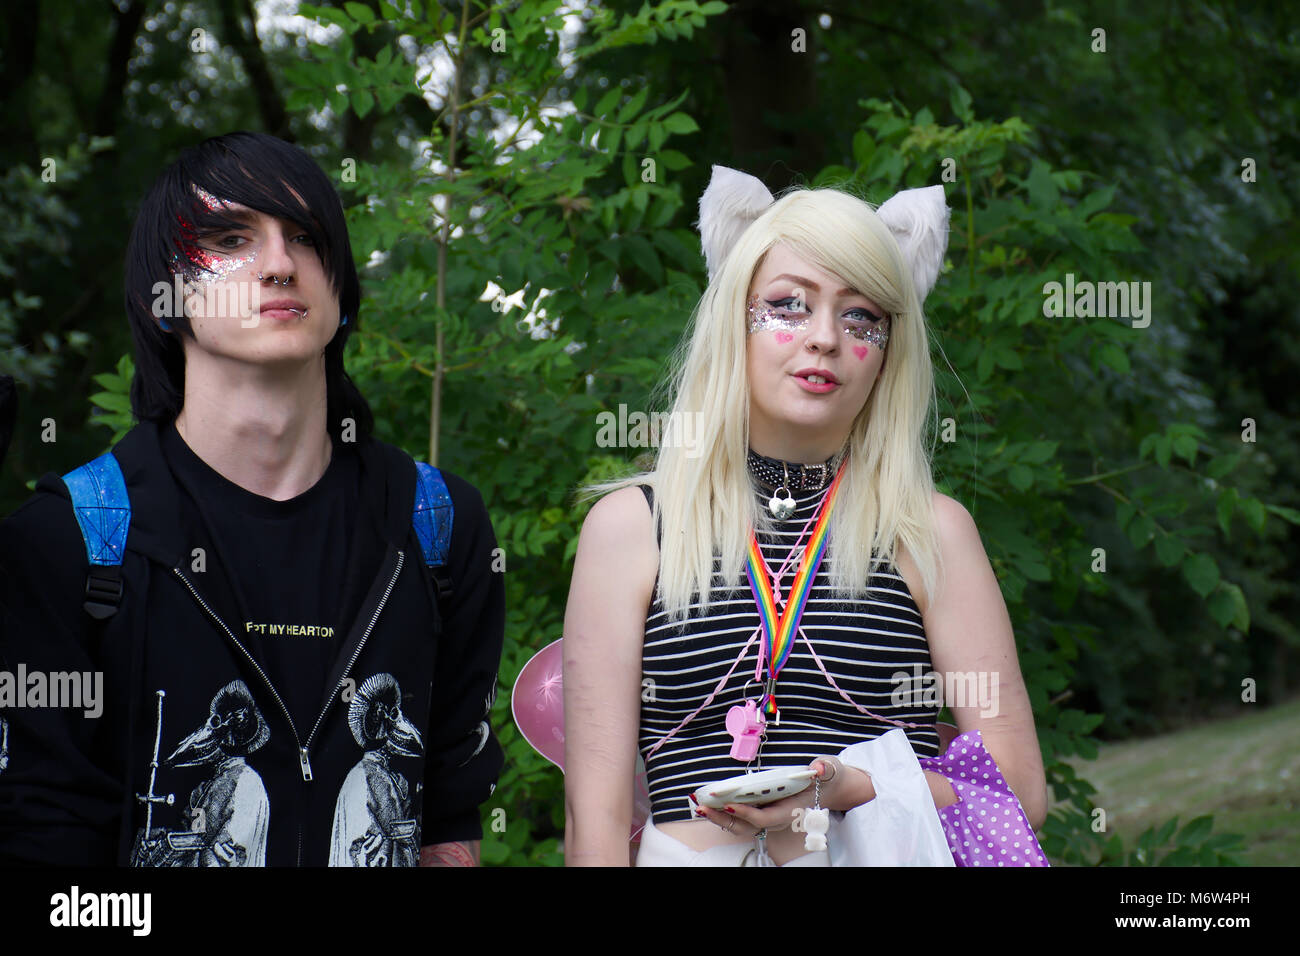 Goth looking young couple in park,breaking male gender stereotype.LGBT pride,Stoke on Trent,Uk.Cosplayers,face painting,diversity,trend.24 June 2017. Stock Photo